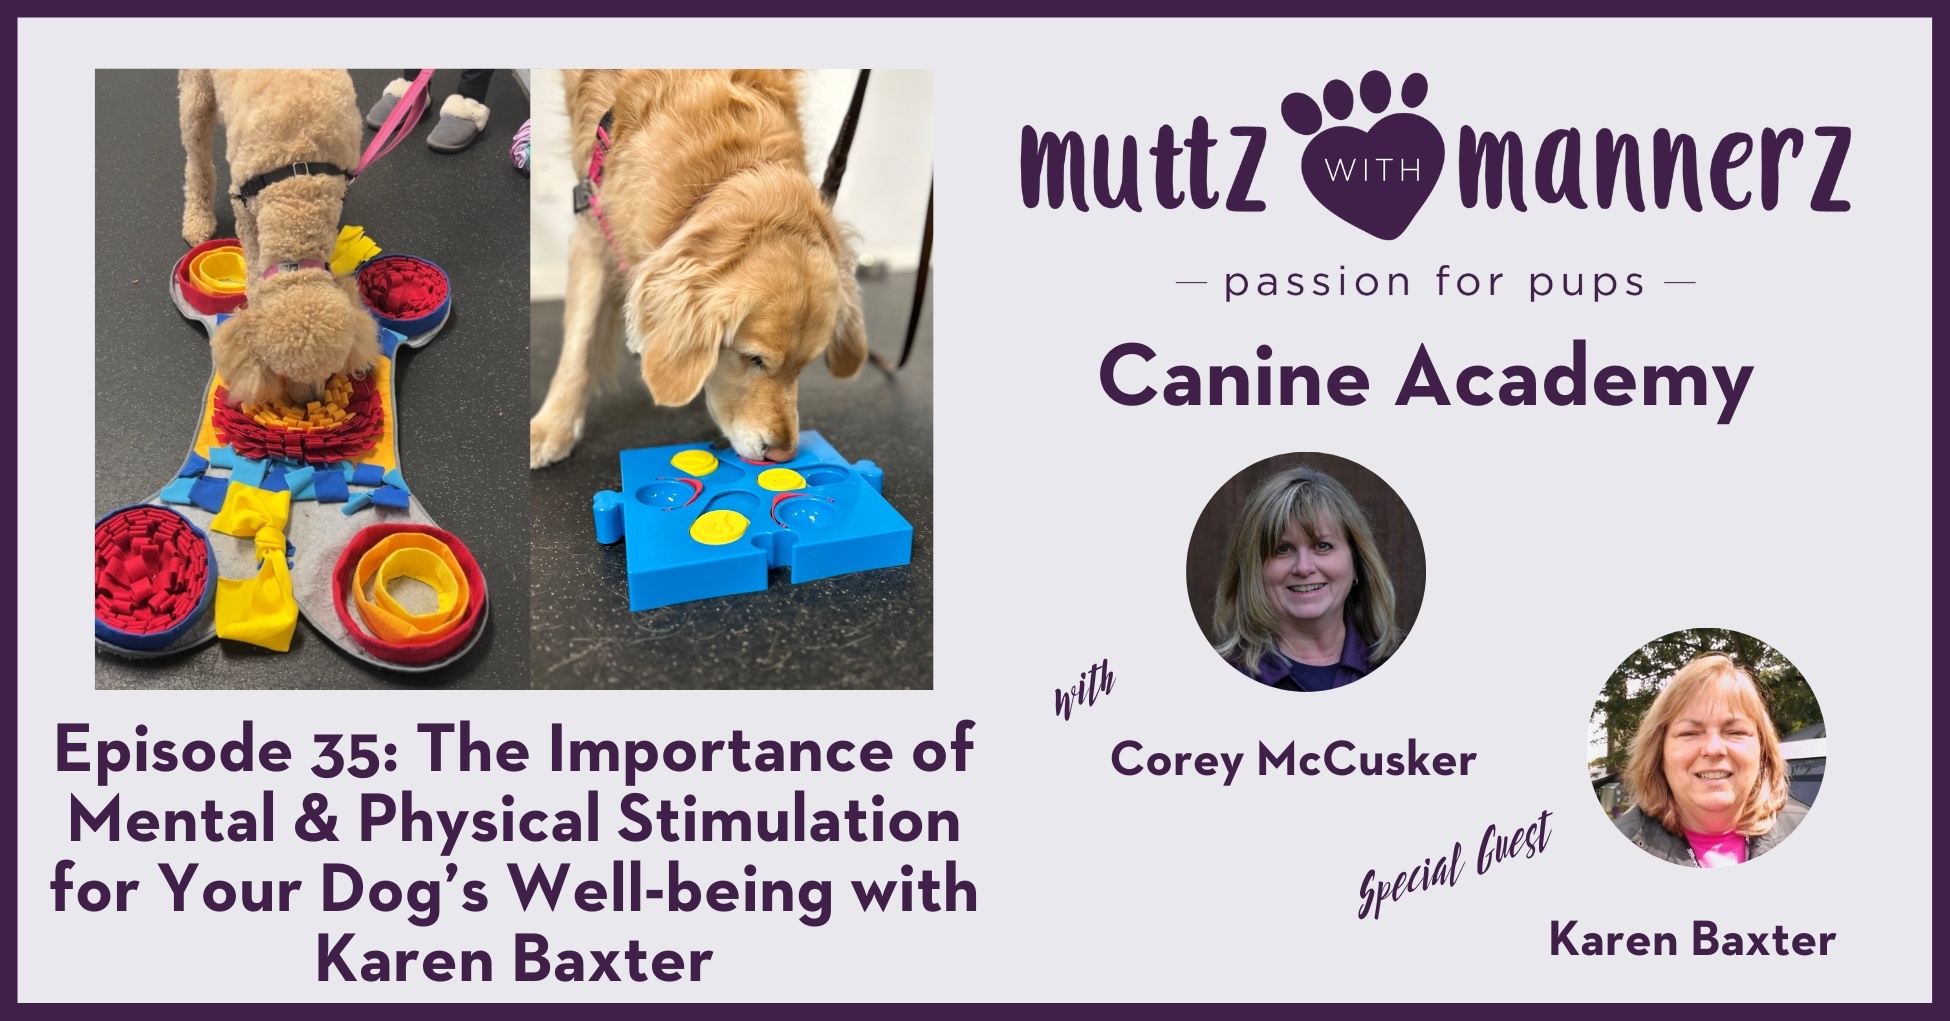 Episode 35: The Importance of Mental & Physical Stimulation for Your Dog’s Well-being with Karen Baxter